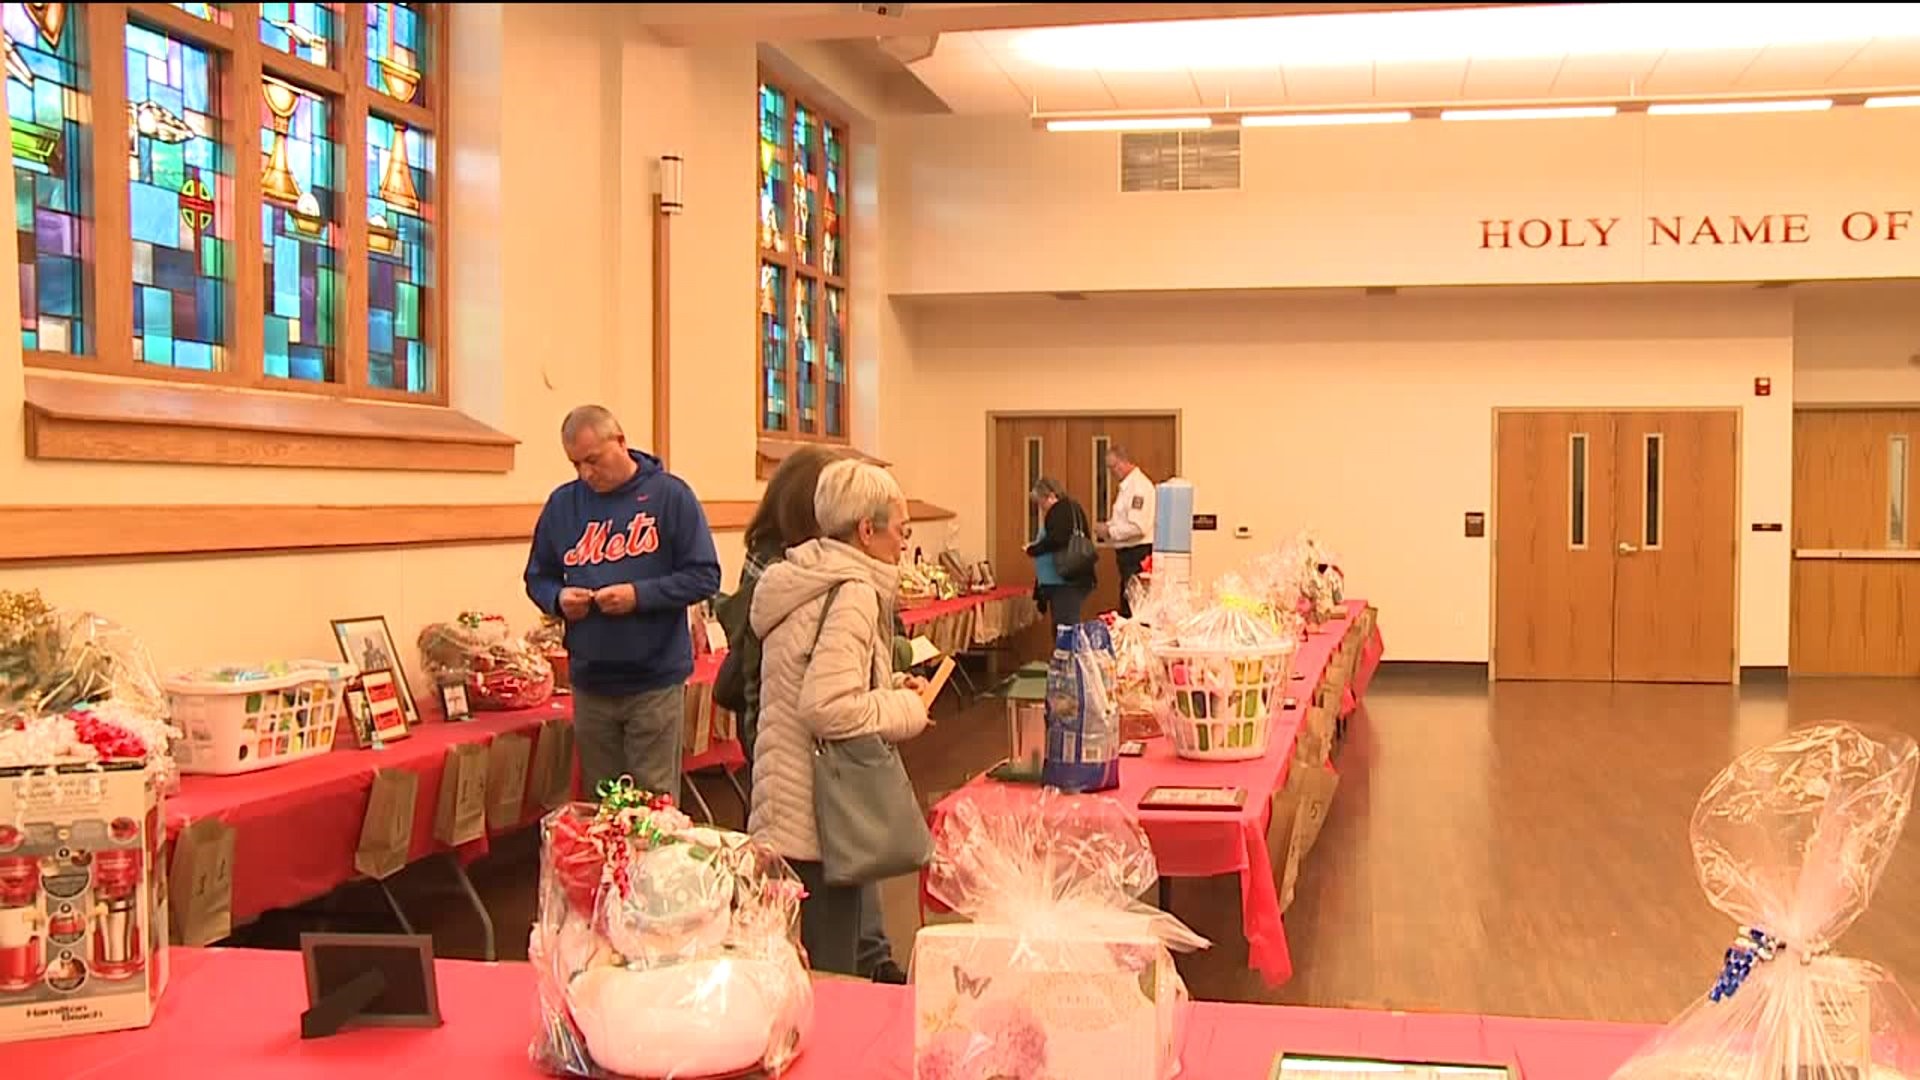 Firefighters Serve at Annual Fundraiser